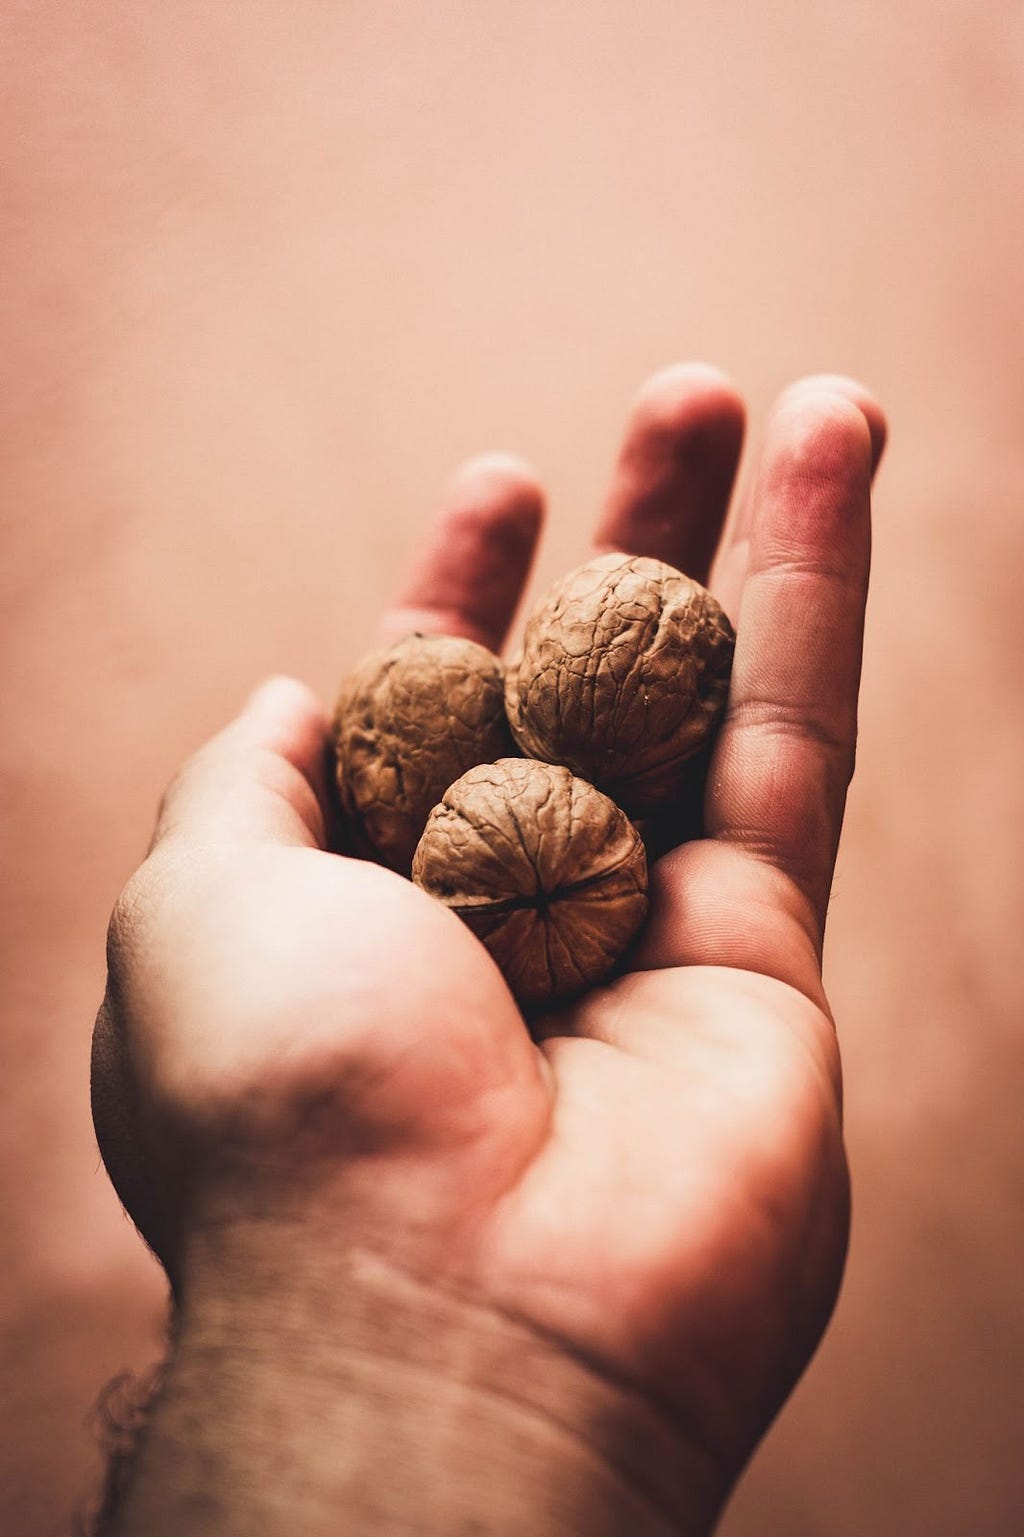 A man holding a handful of walnuts.